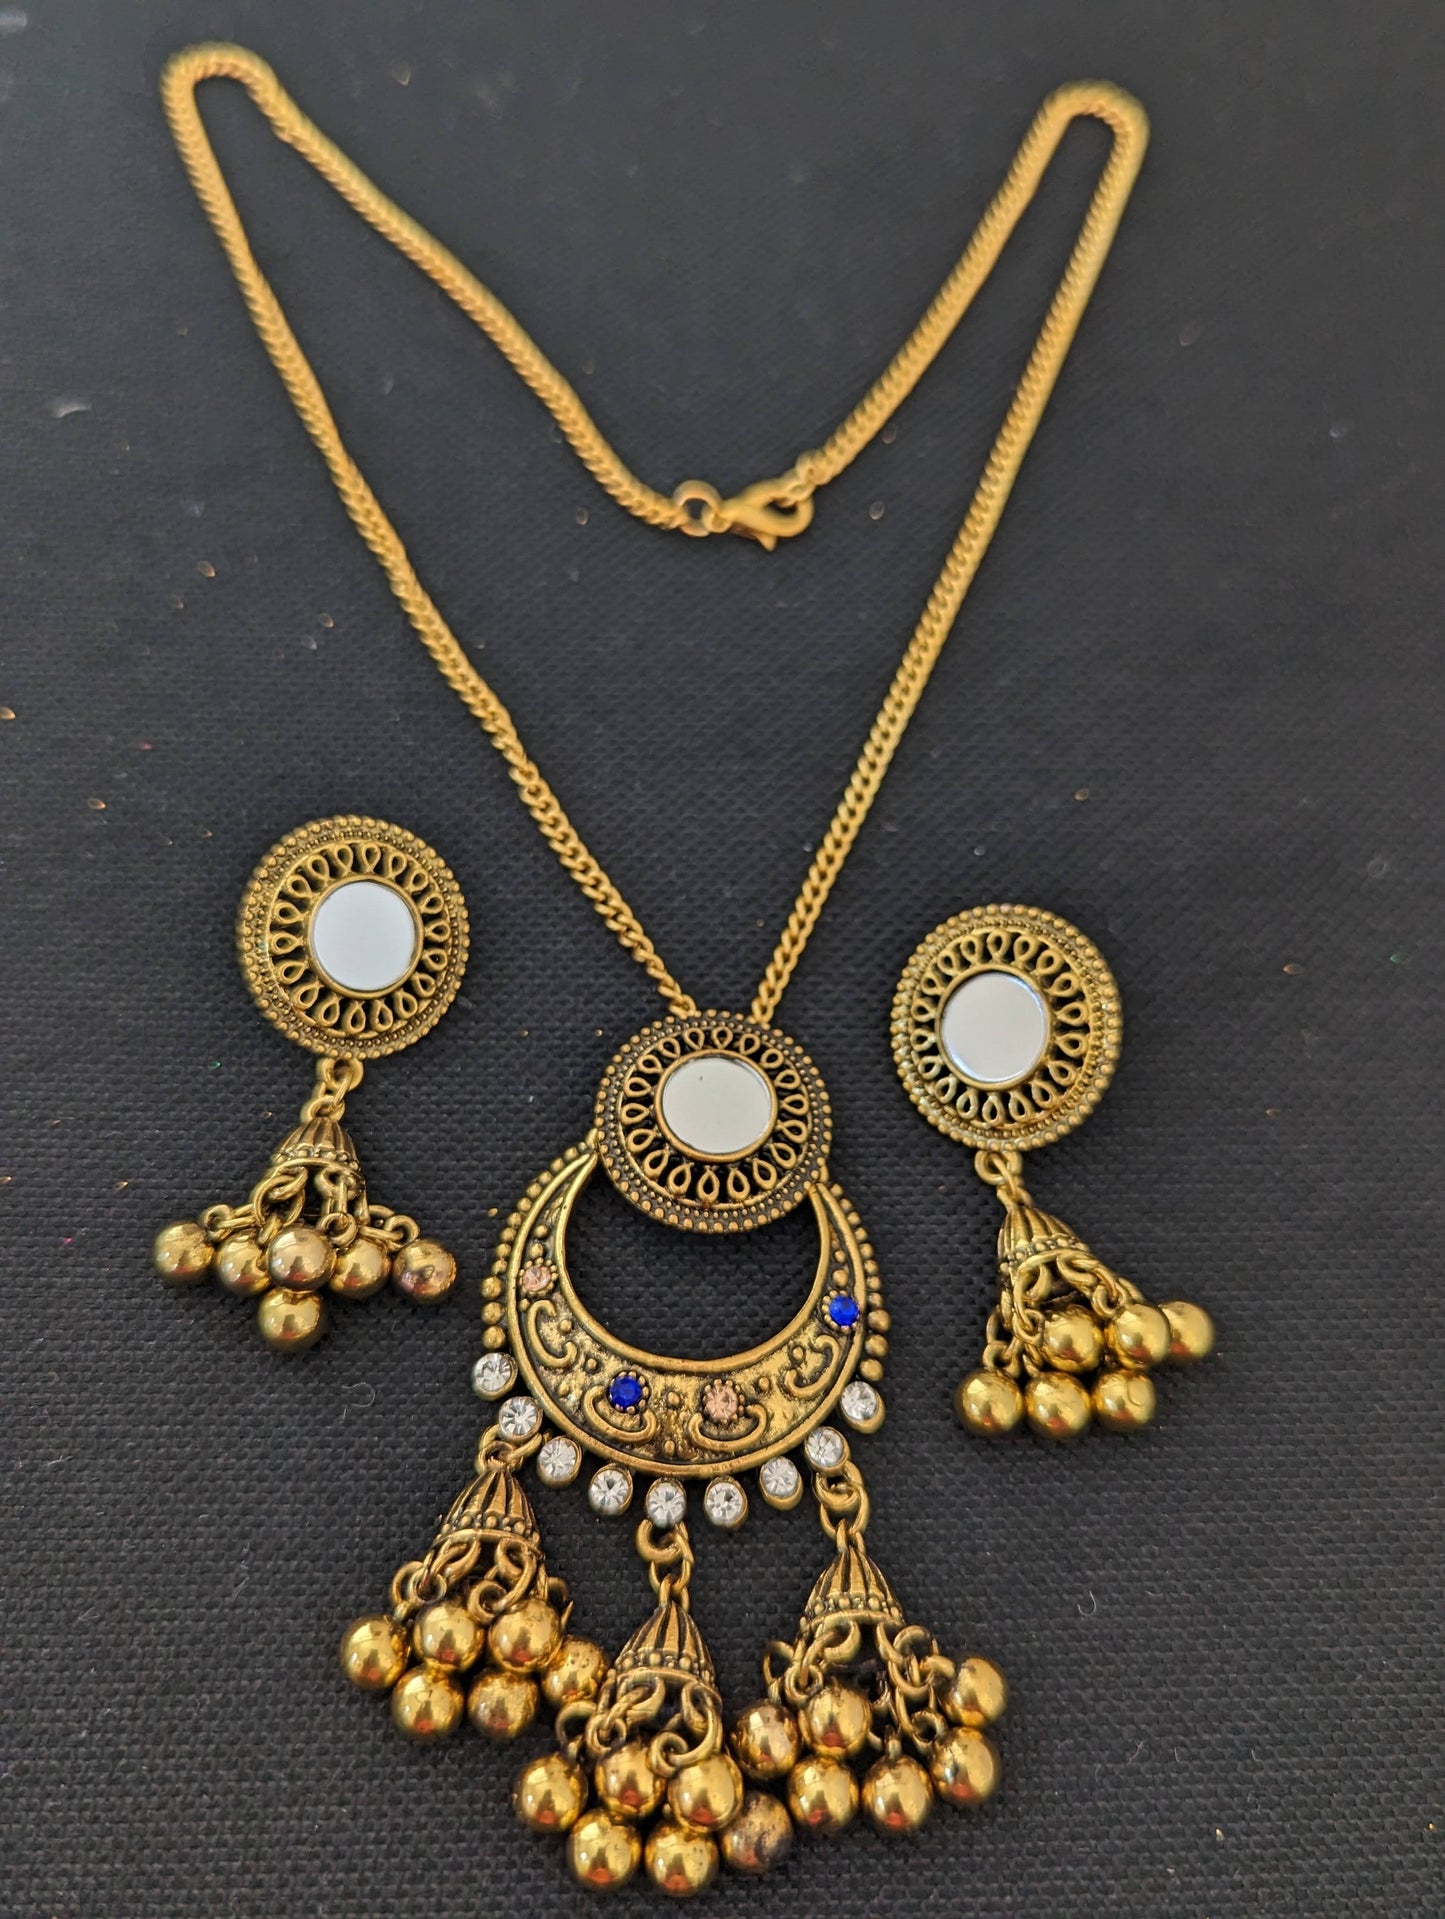 Antique gold mirror pendant chain necklace and earring set - Design 6